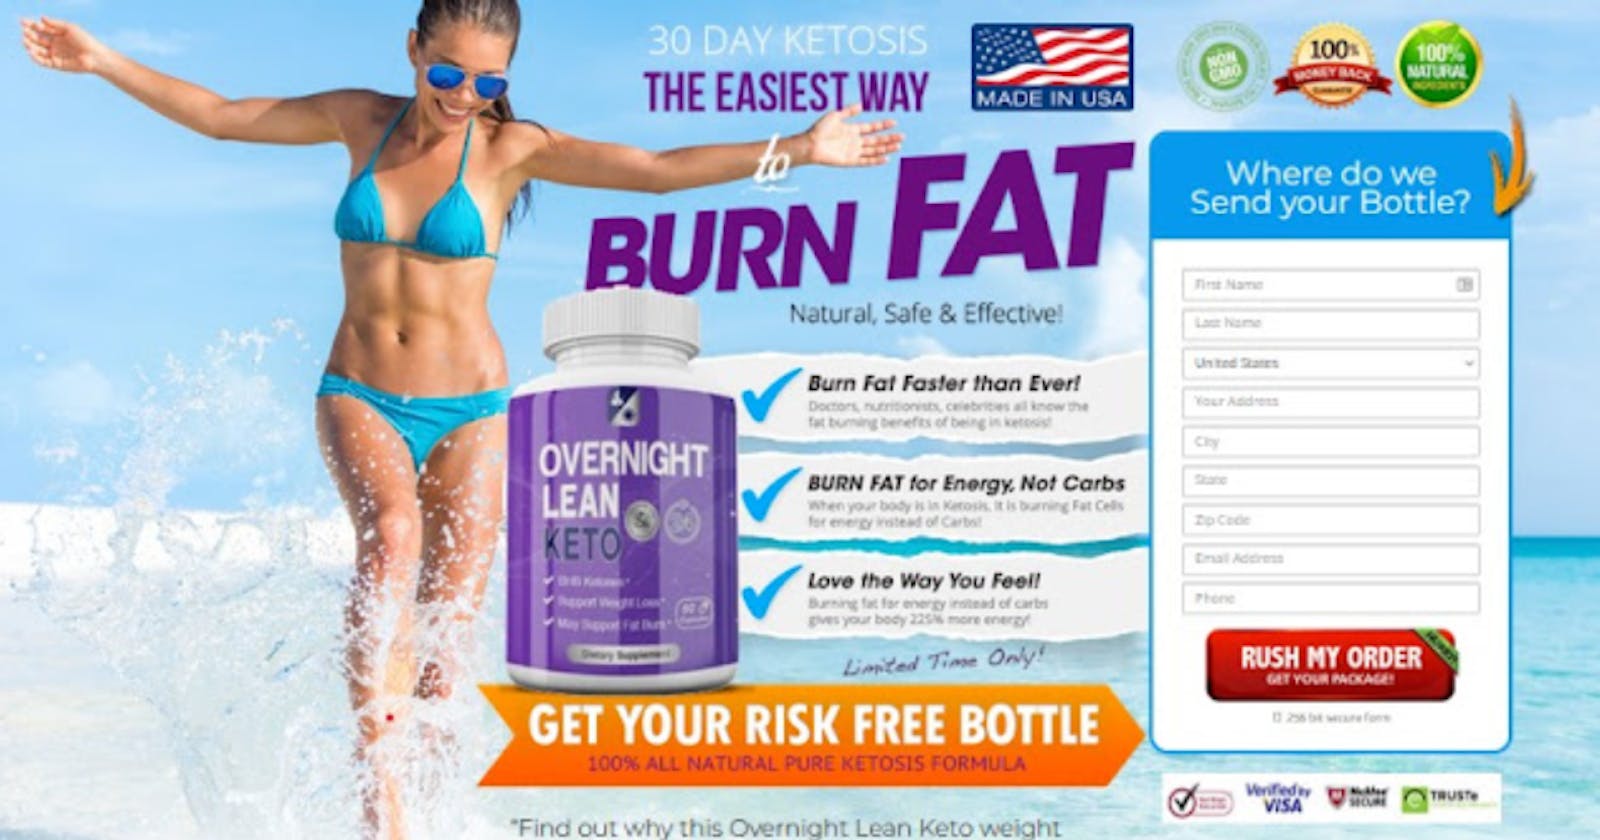 Overnight Lean Keto Excellent Effective Of Weight Reduction & weight Loss Formula?